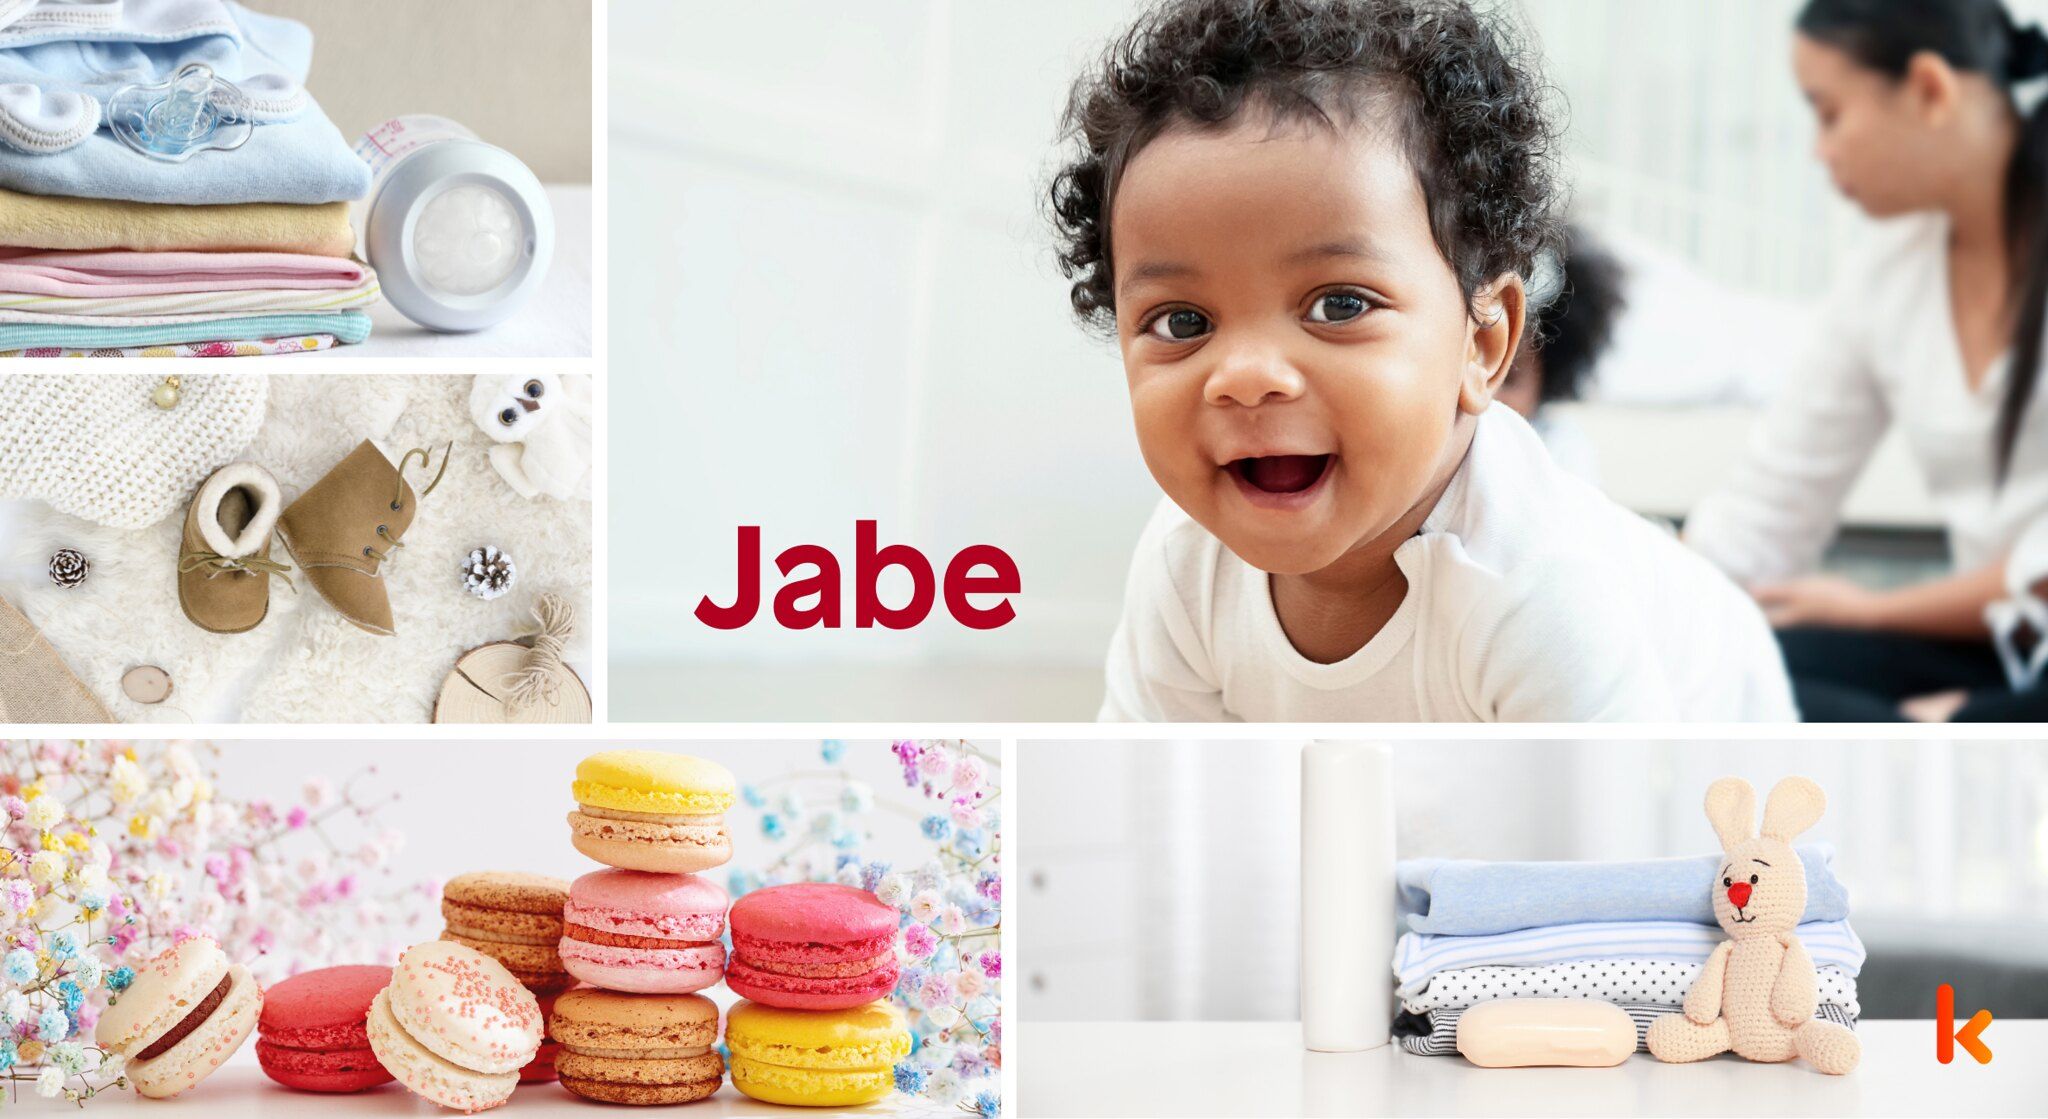 Meaning of the name Jabe